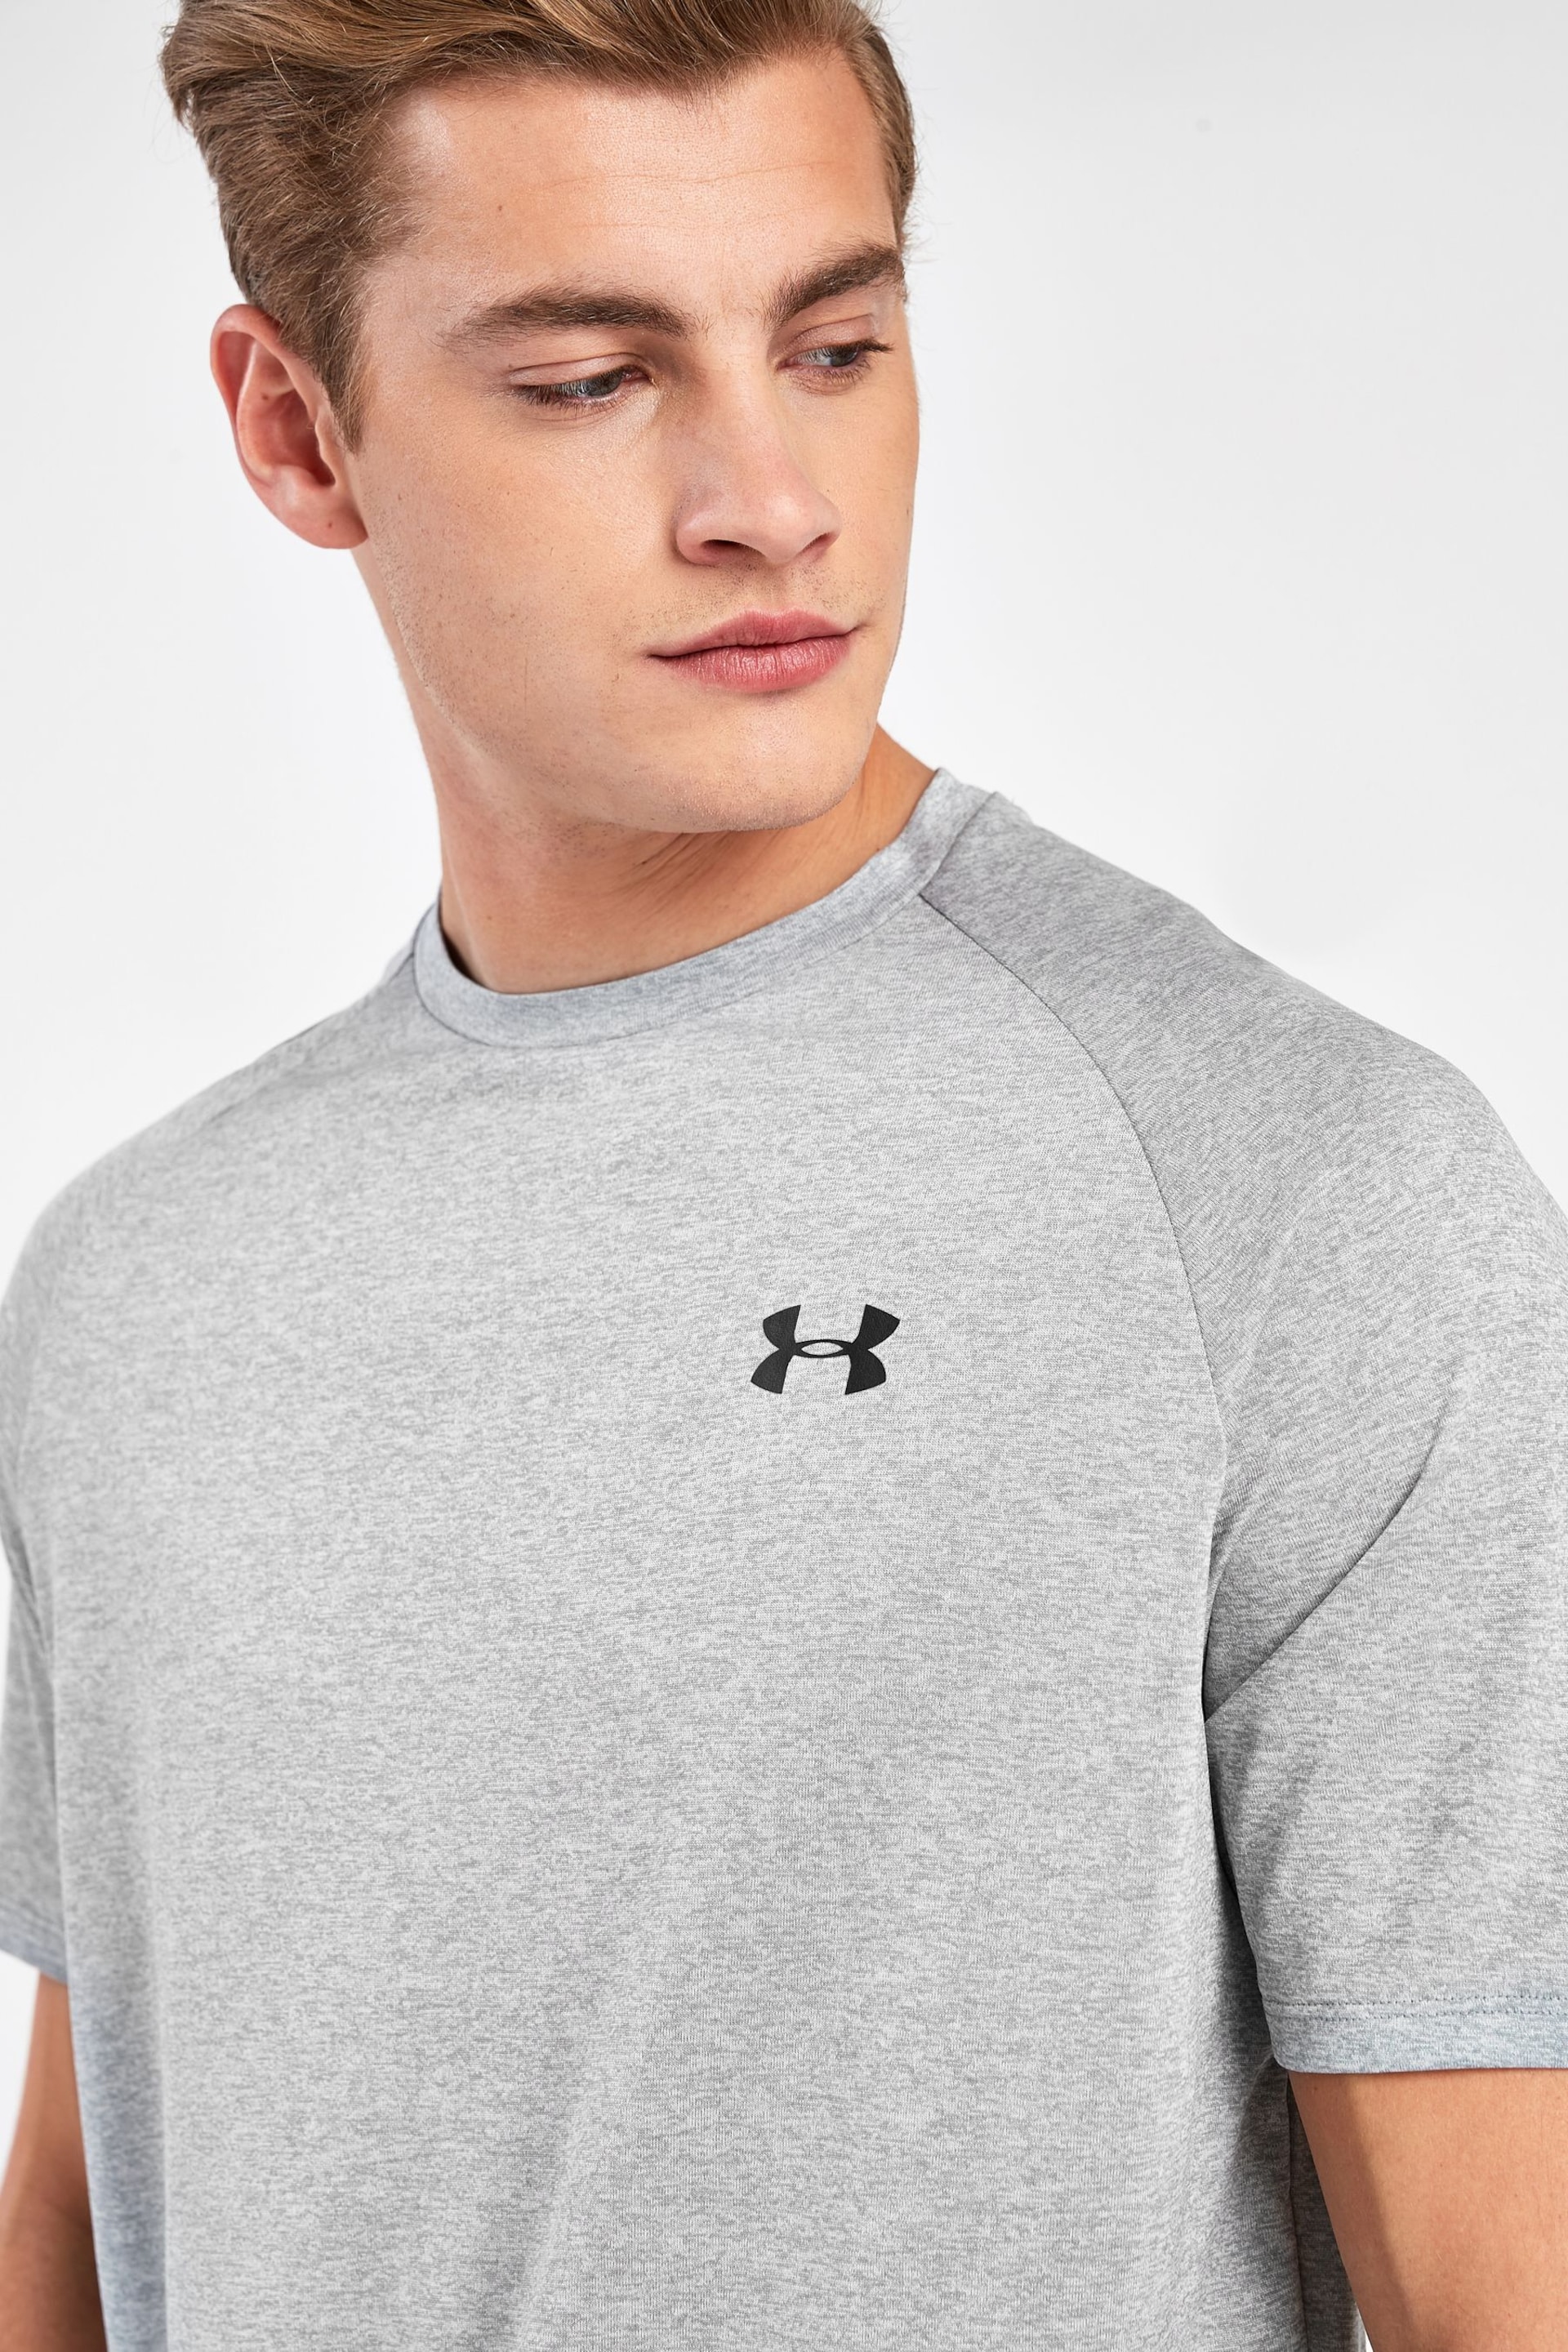 Under Armour Grey Tech 2 T-Shirt - Image 3 of 4